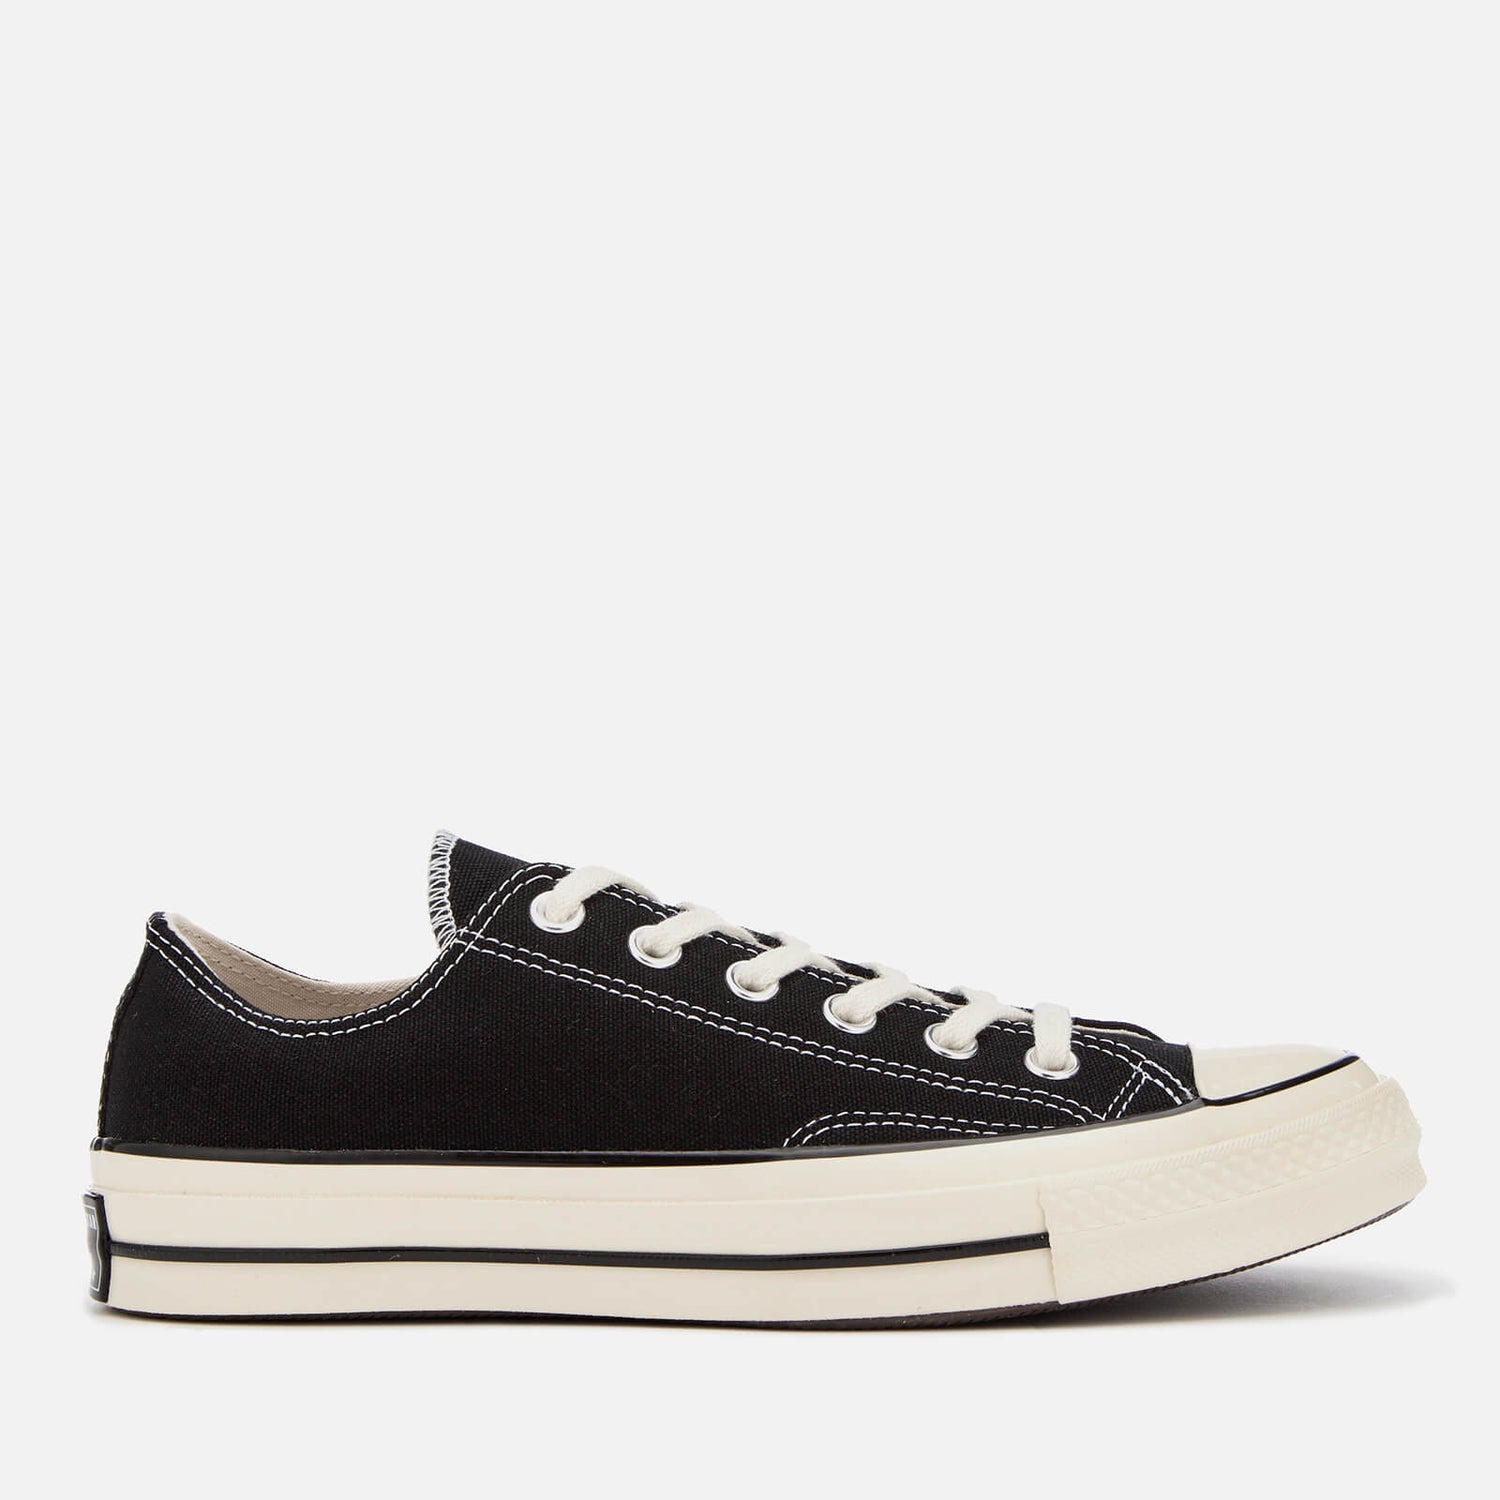 Converse Chuck 70 Ox Trainers - Black/Black/Egret | FREE UK Delivery